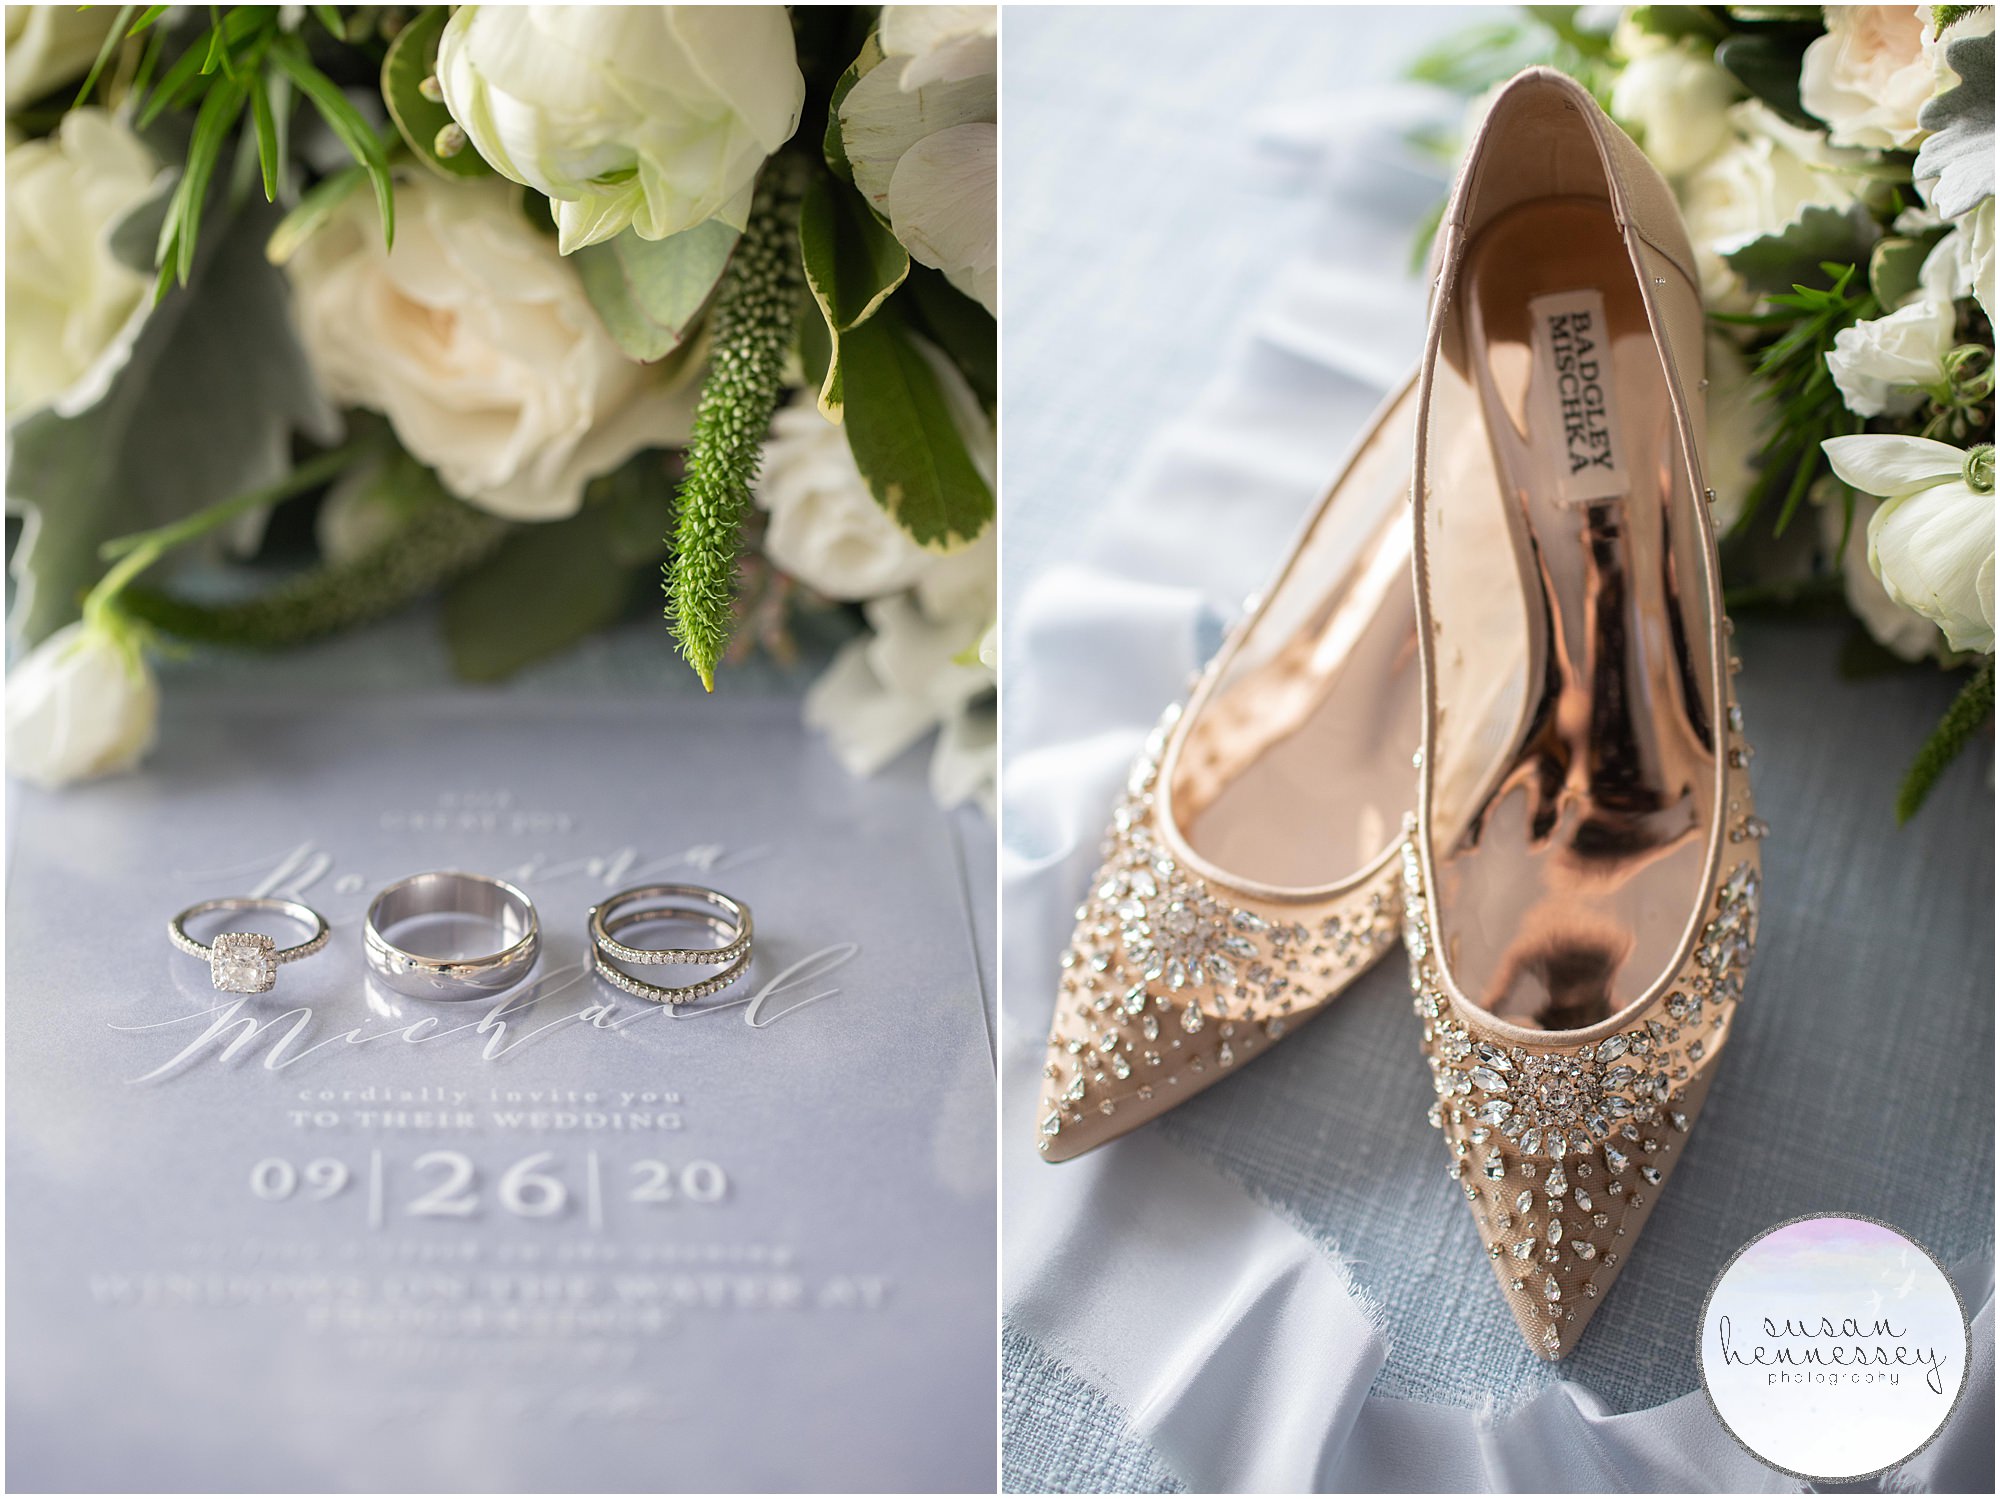 Bridal details at Windows on the Water at Frogbridge Wedding